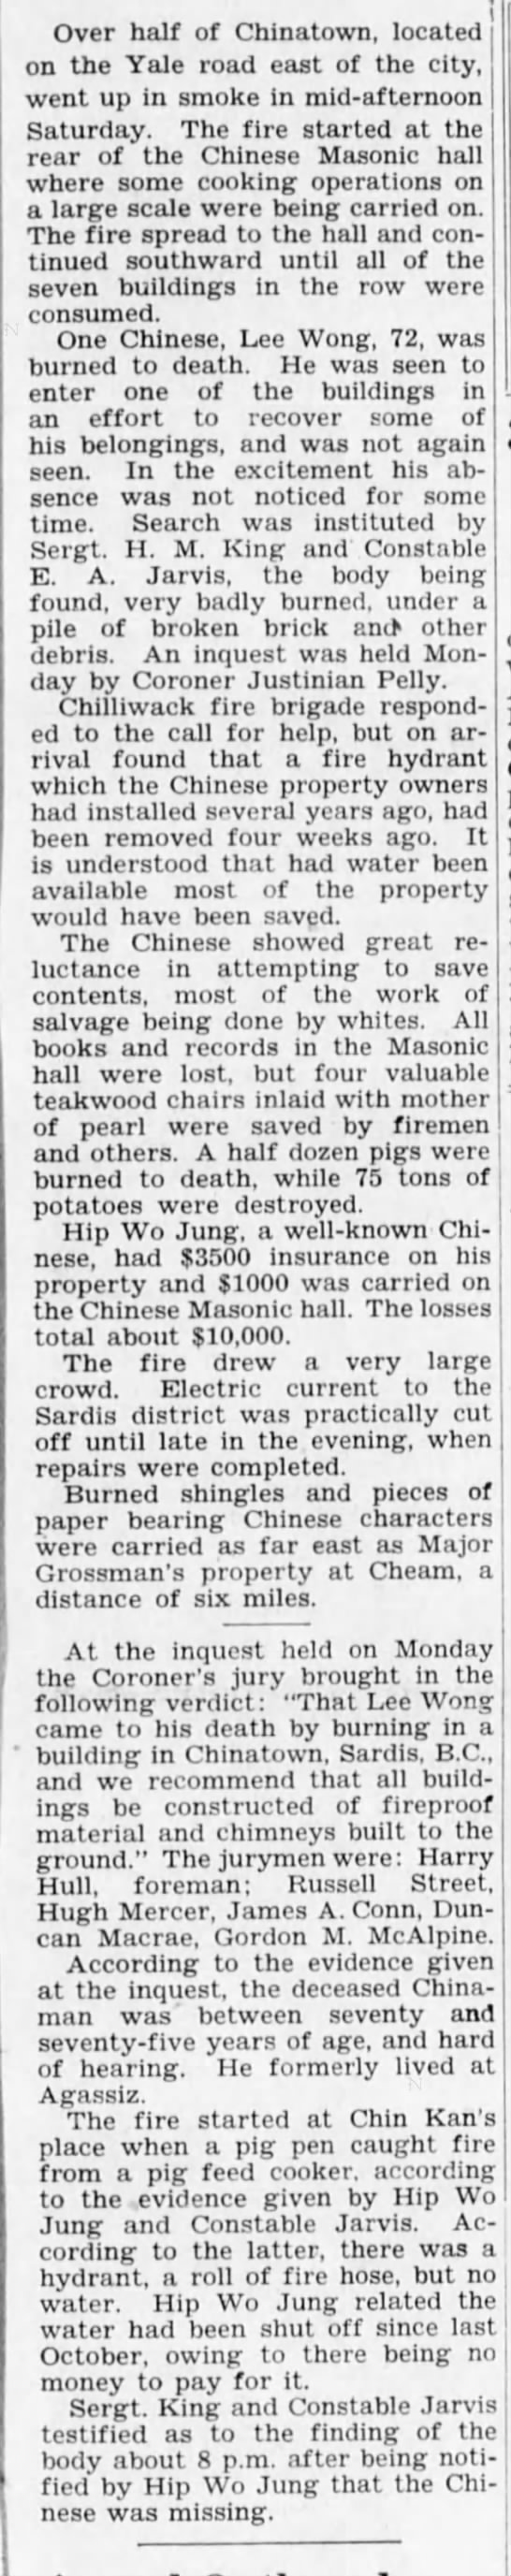 A newspaper clipping from the Chilliwack Progress discussing the 1932 Chinatown fire